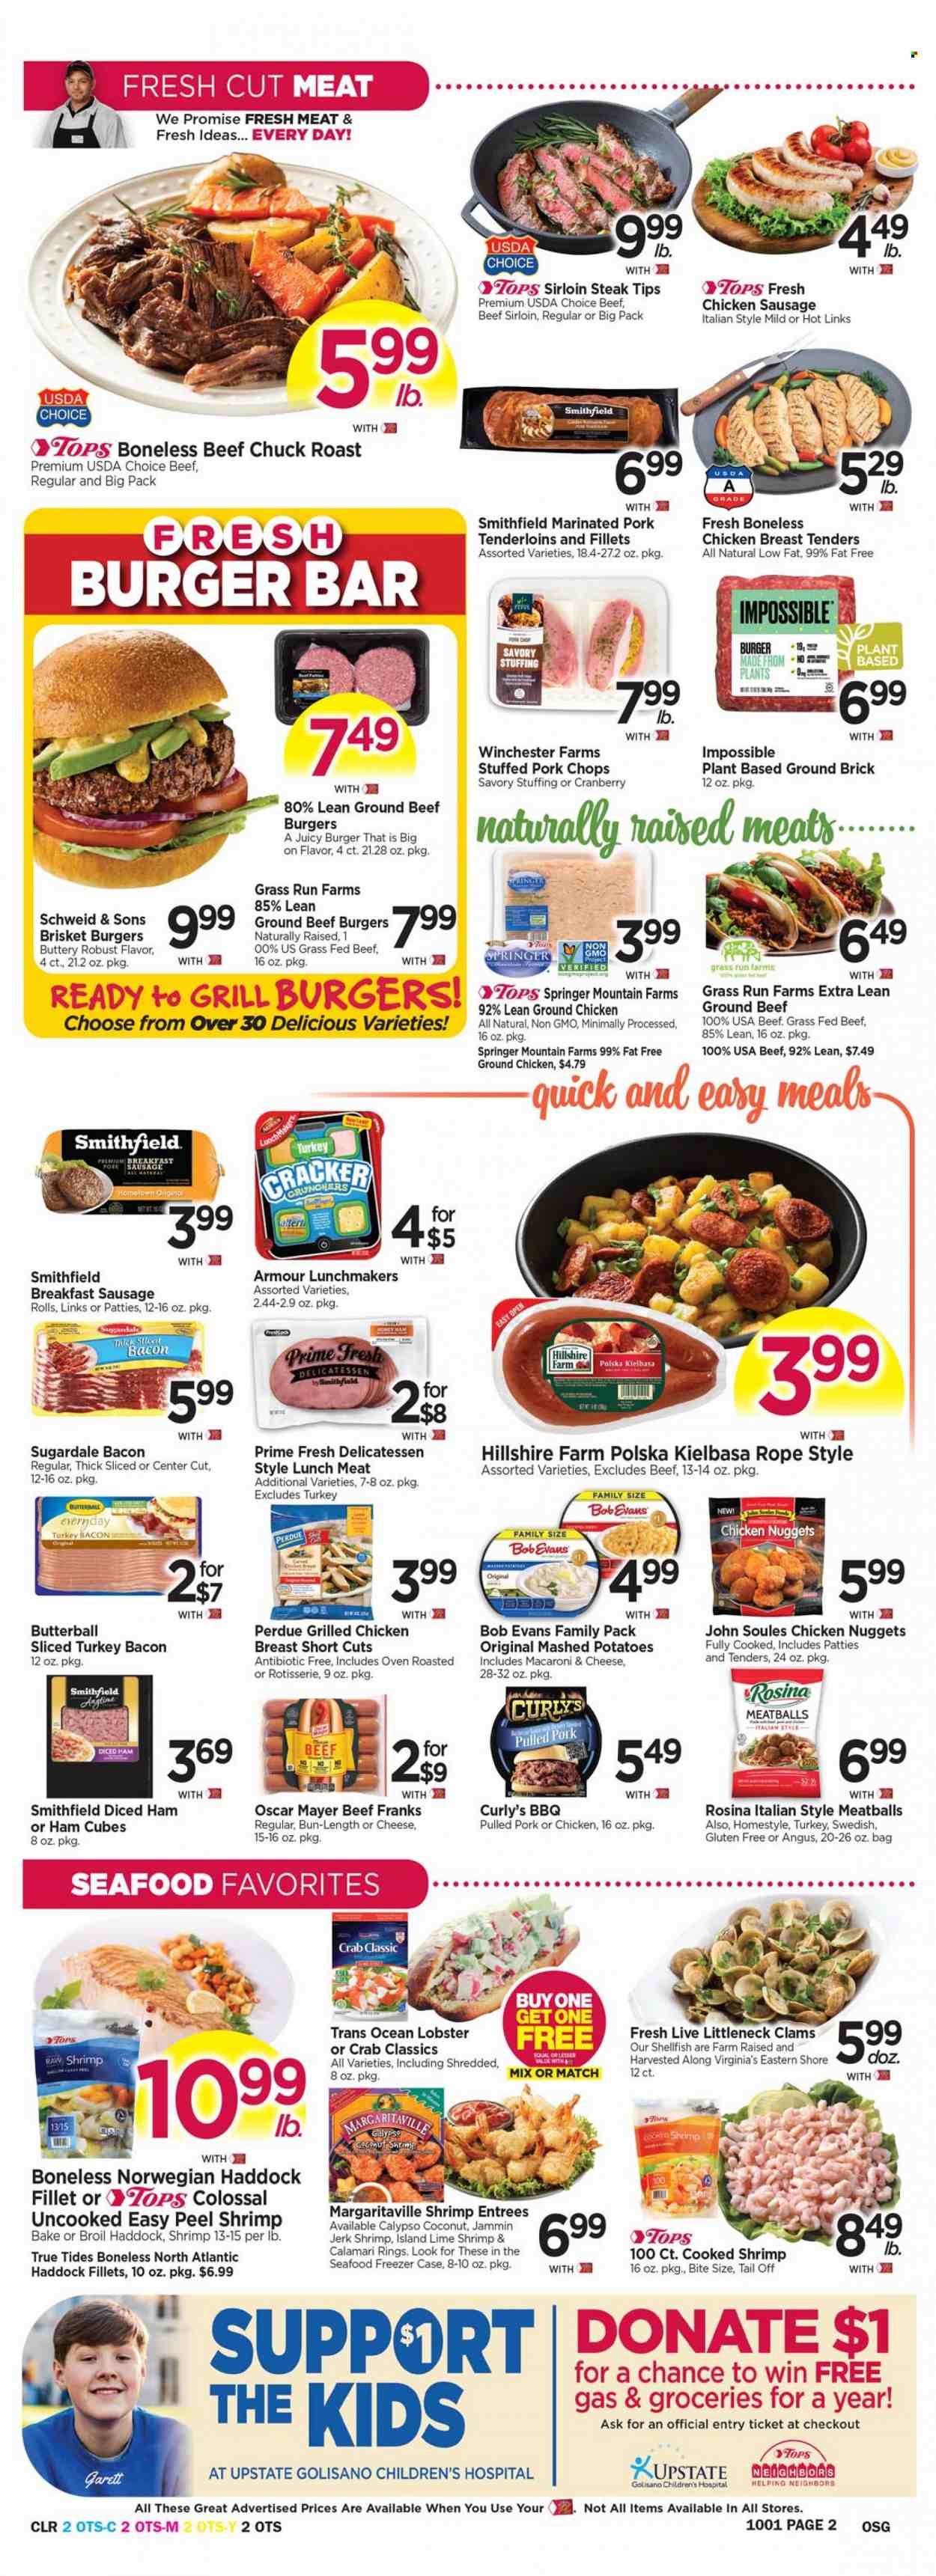 thumbnail - Tops Flyer - 09/25/2022 - 10/01/2022 - Sales products - sausage rolls, calamari, clams, lobster, haddock, seafood, crab, shrimps, macaroni & cheese, mashed potatoes, chicken tenders, meatballs, nuggets, chicken nuggets, beef burger, Perdue®, Bob Evans, pulled pork, Sugardale, bacon, Butterball, sliced turkey, turkey bacon, Hillshire Farm, Oscar Mayer, sausage, pork sausage, chicken sausage, kielbasa, lunch meat, honey, ground chicken, beef meat, beef sirloin, ground beef, steak, sirloin steak, chuck roast, pork chops, pork meat, pork tenderloin, marinated pork. Page 2.